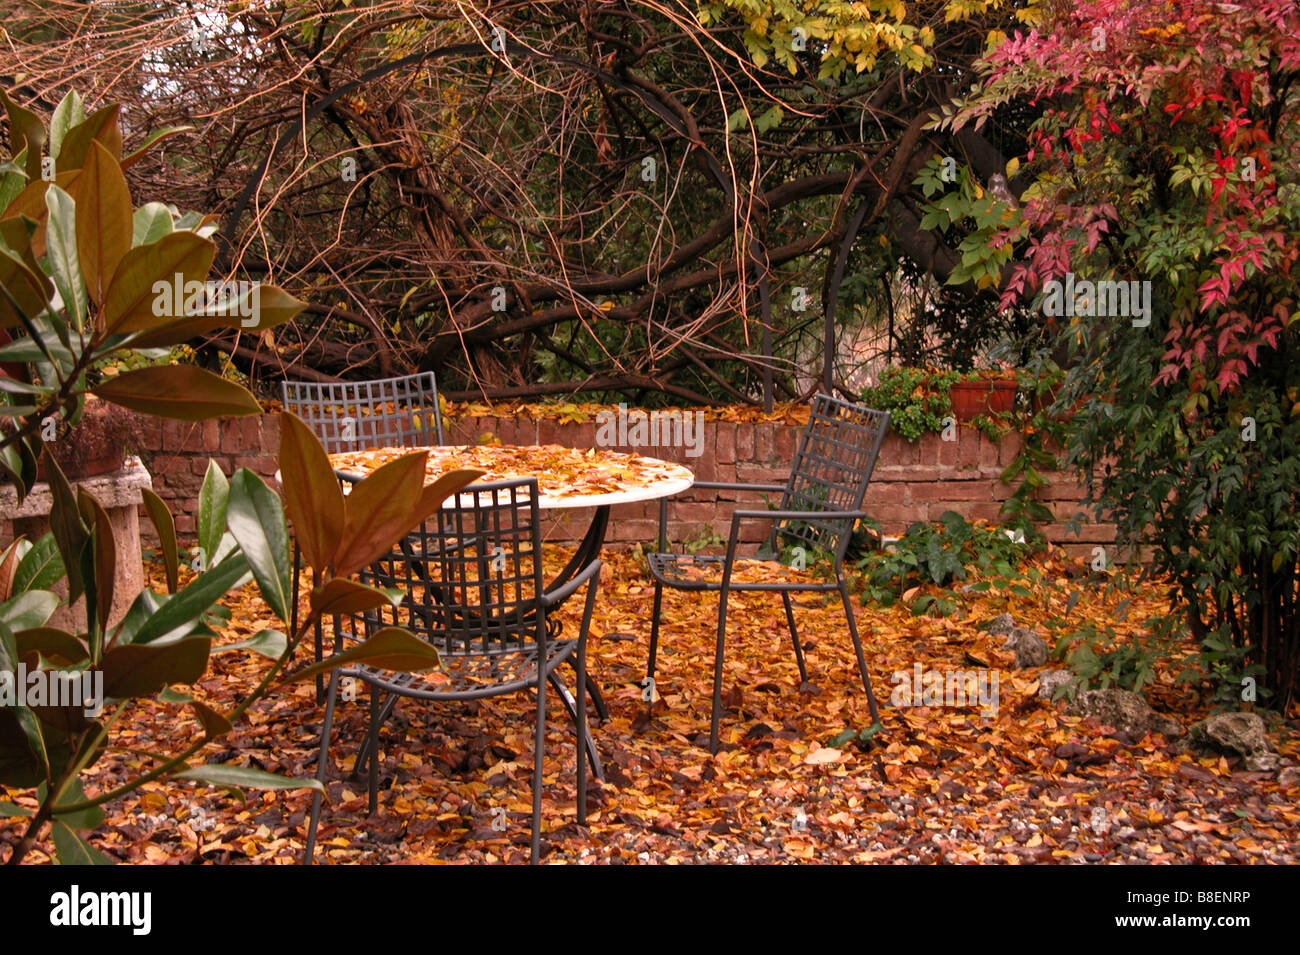 The golden leaves of autumn are strewn over a courtyard patio in Sienna Italy. Stock Photo